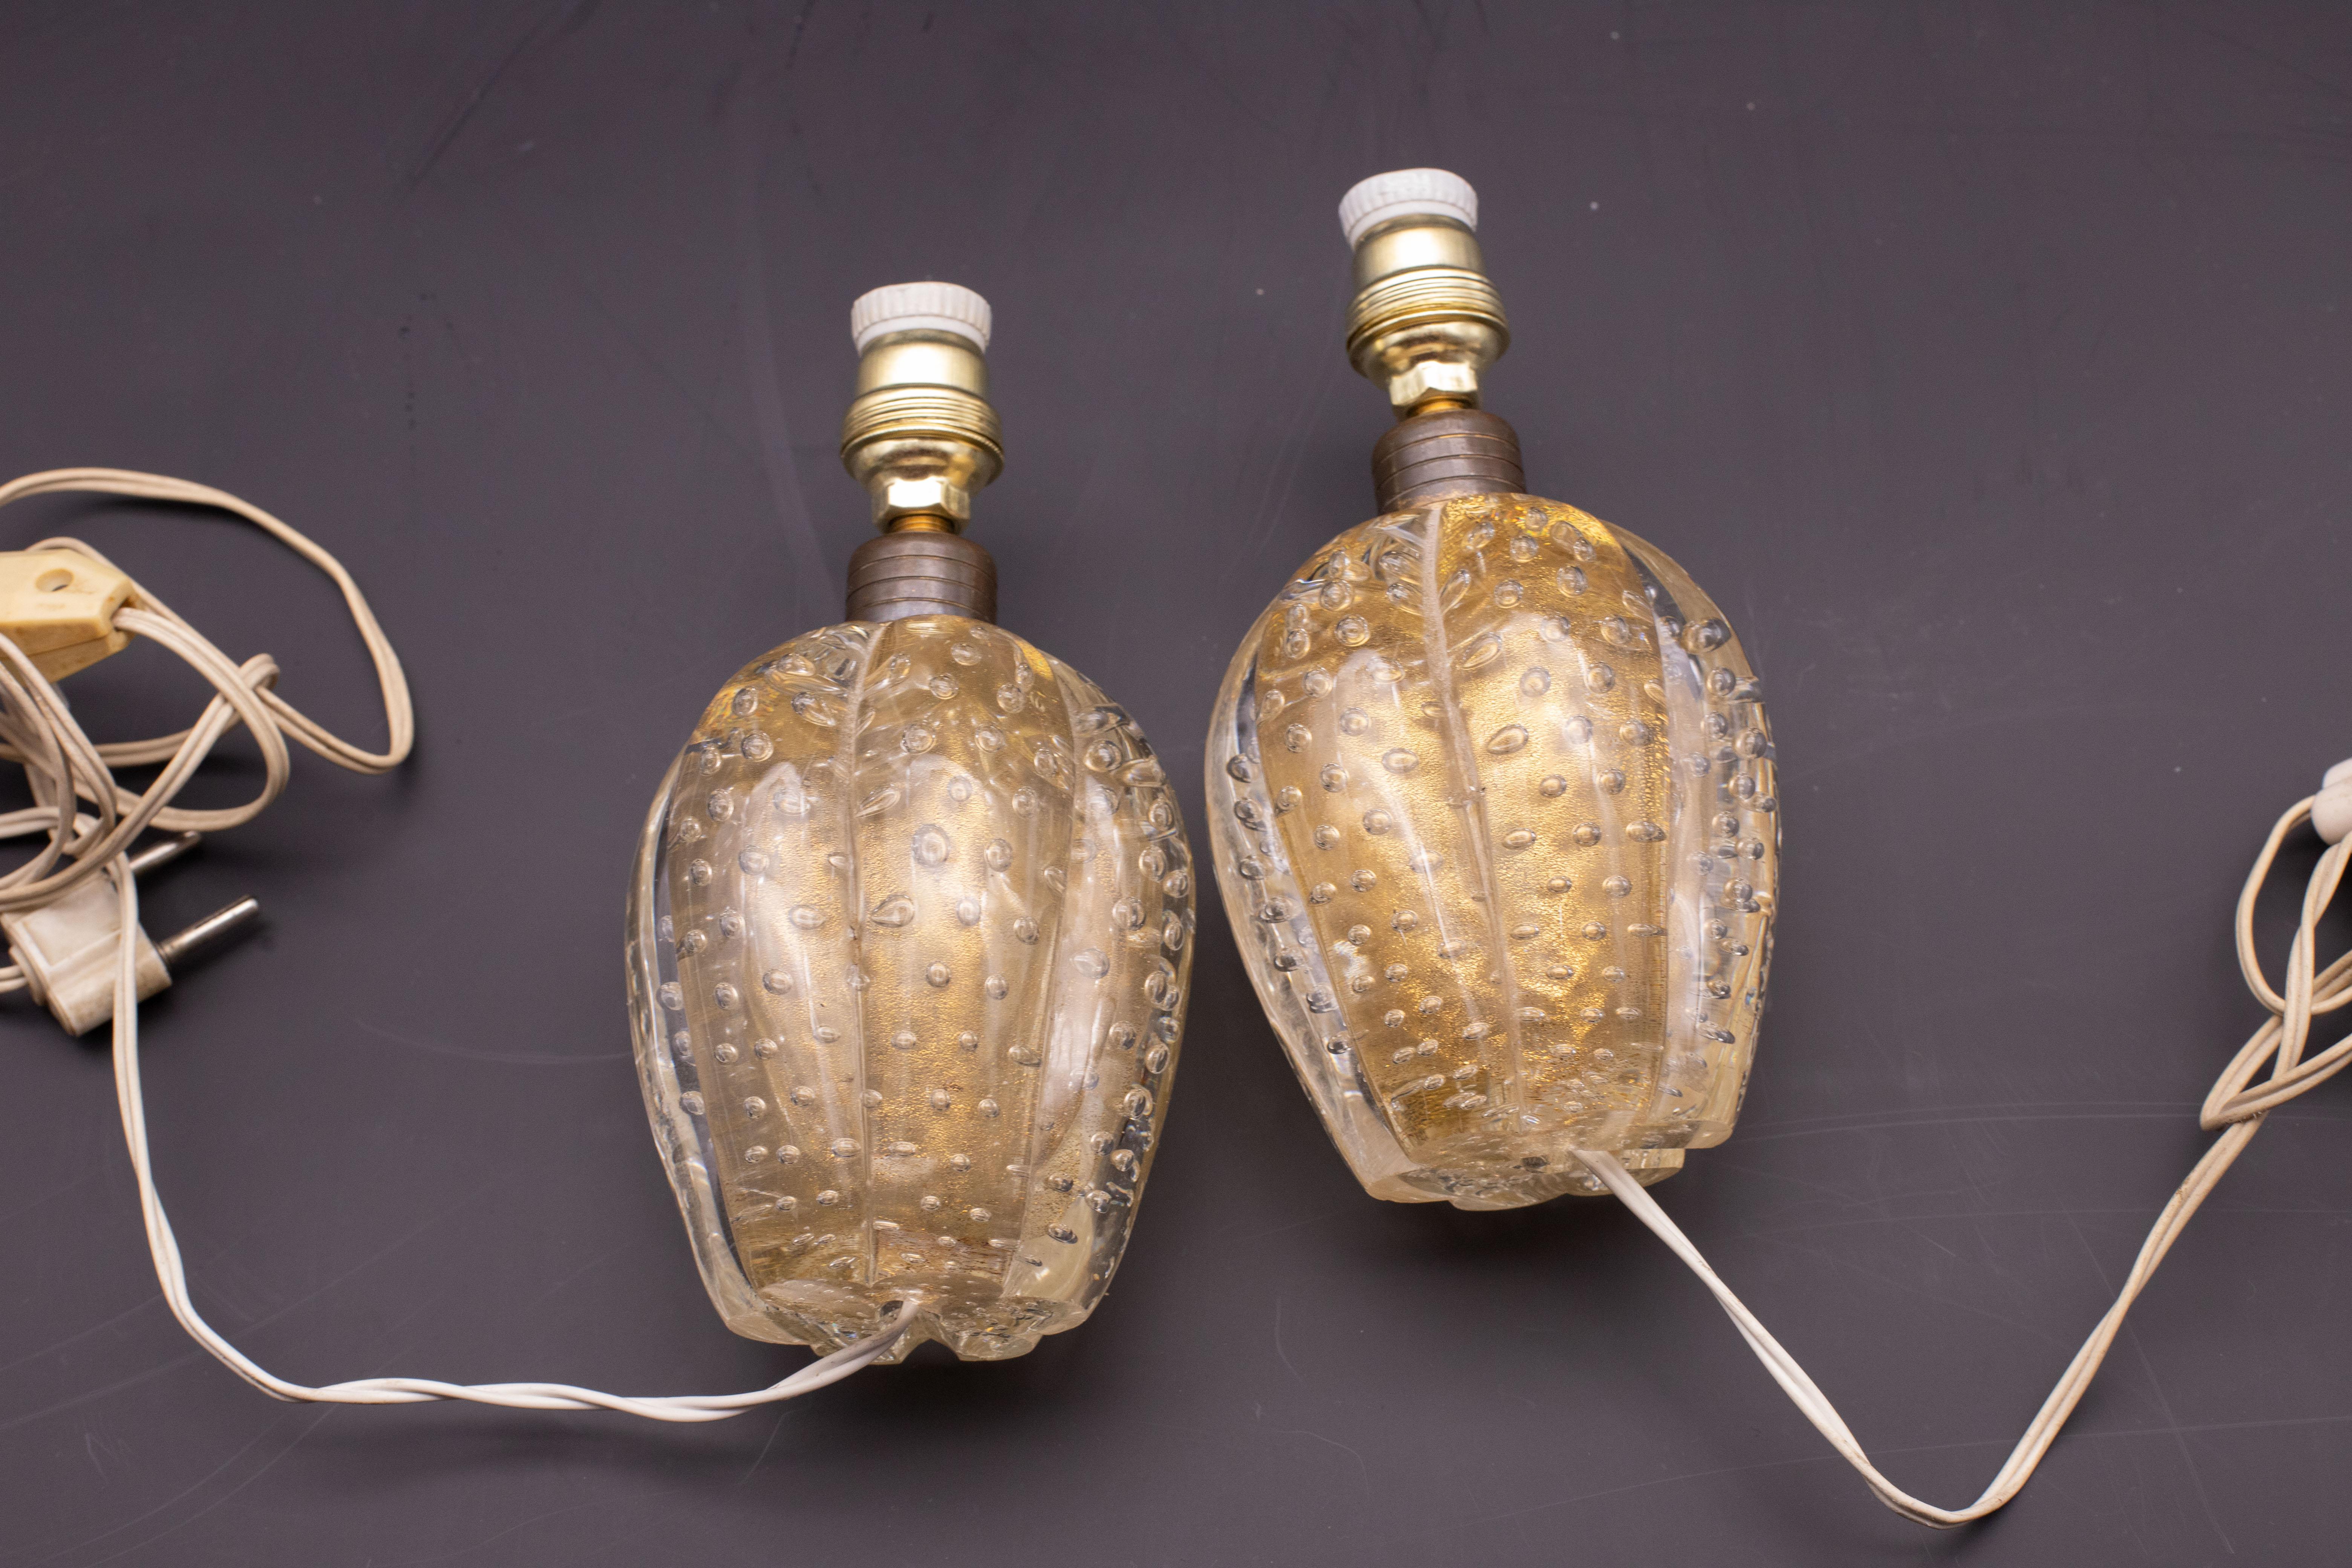 Set of 2 Table Lamp Art Decò by Barovier e Toso, Murano Gold Bubble Glass, 1950s For Sale 3